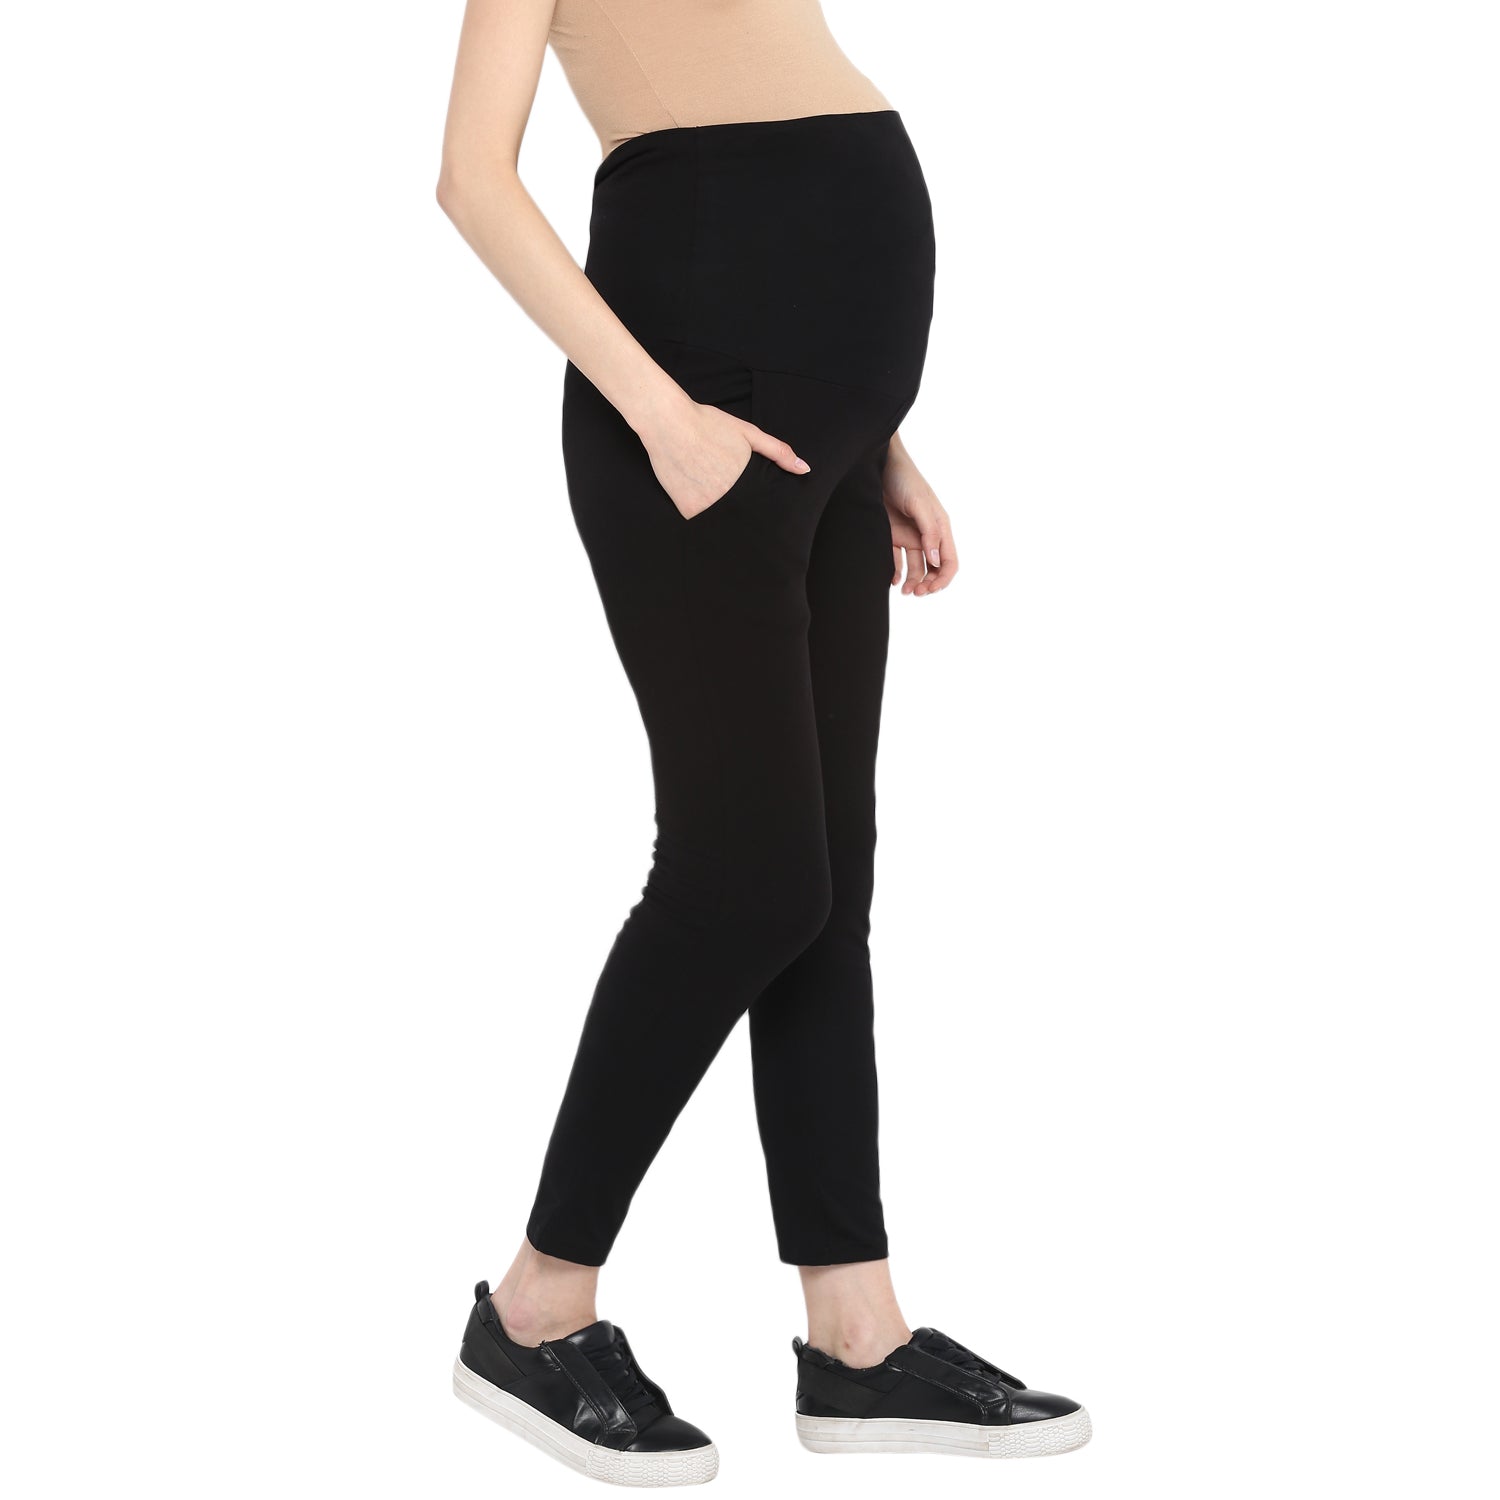  Leggings Depot Womens Maternity Leggings Over The Belly  Pregnancy Casual Yoga Tights